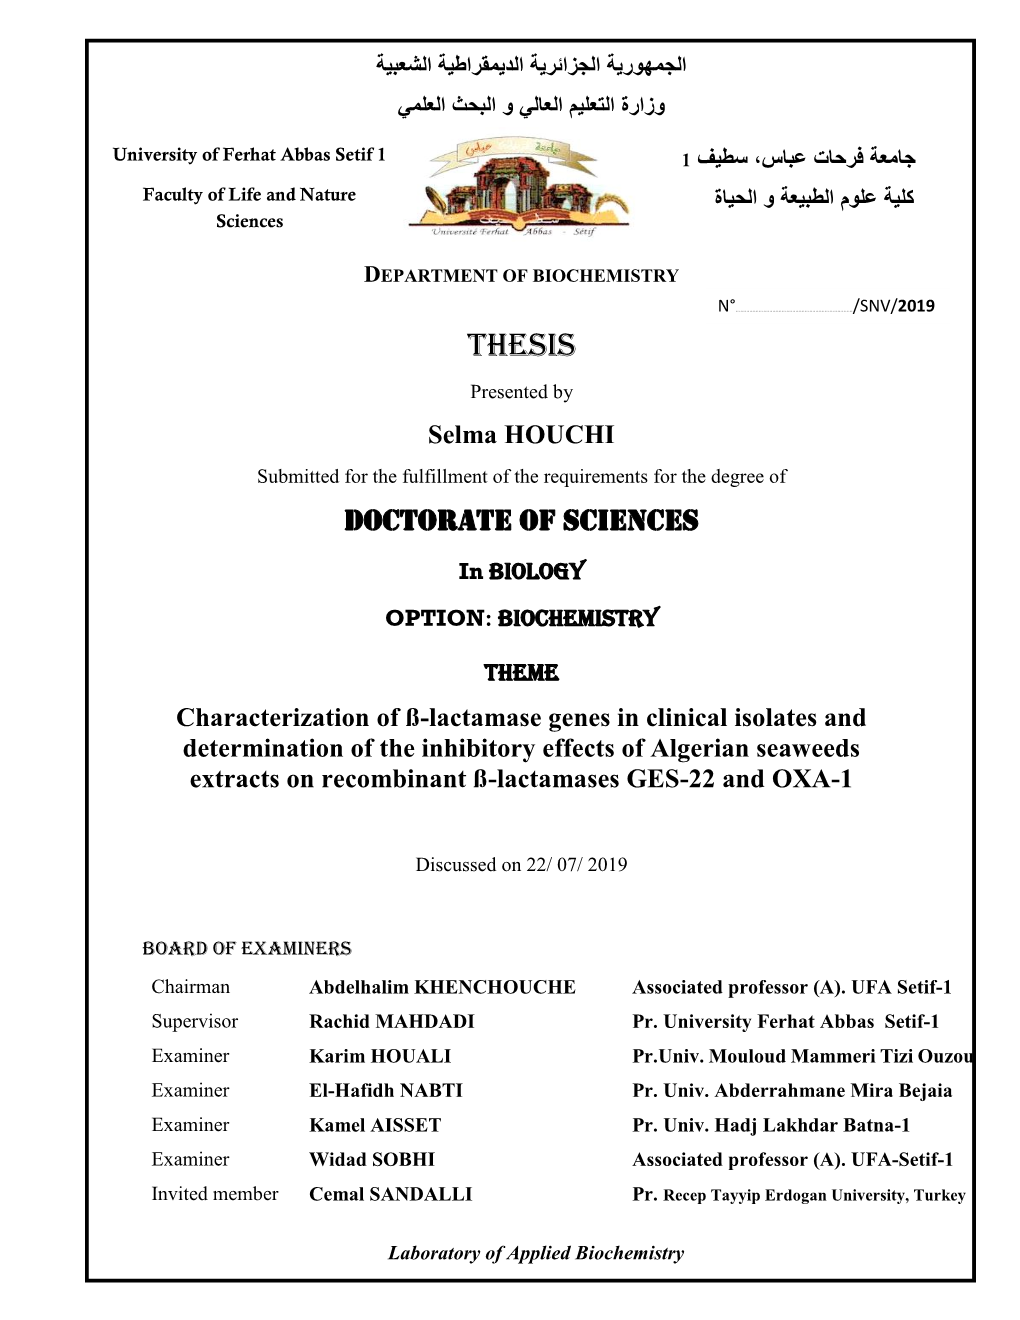 Thesis Presented by Selma HOUCHI Submitted for the Fulfillment of the Requirements for the Degree of Doctorate of Sciences in Biology